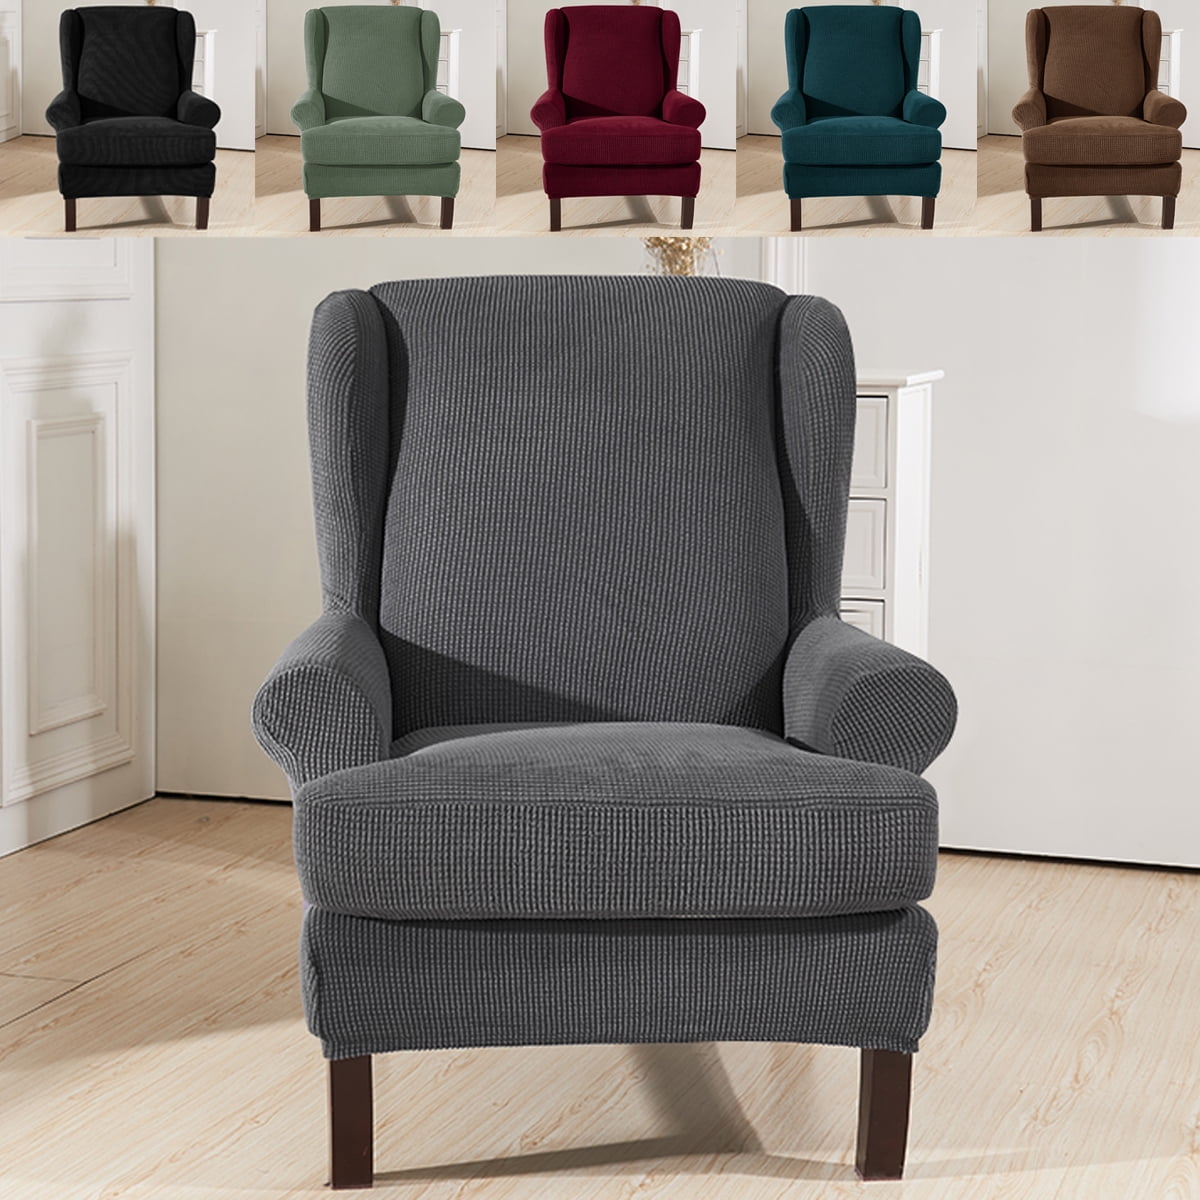 Elastic Armchair Wingback Wing Chair Slipcovers Home Furniture Protector Cover @ 